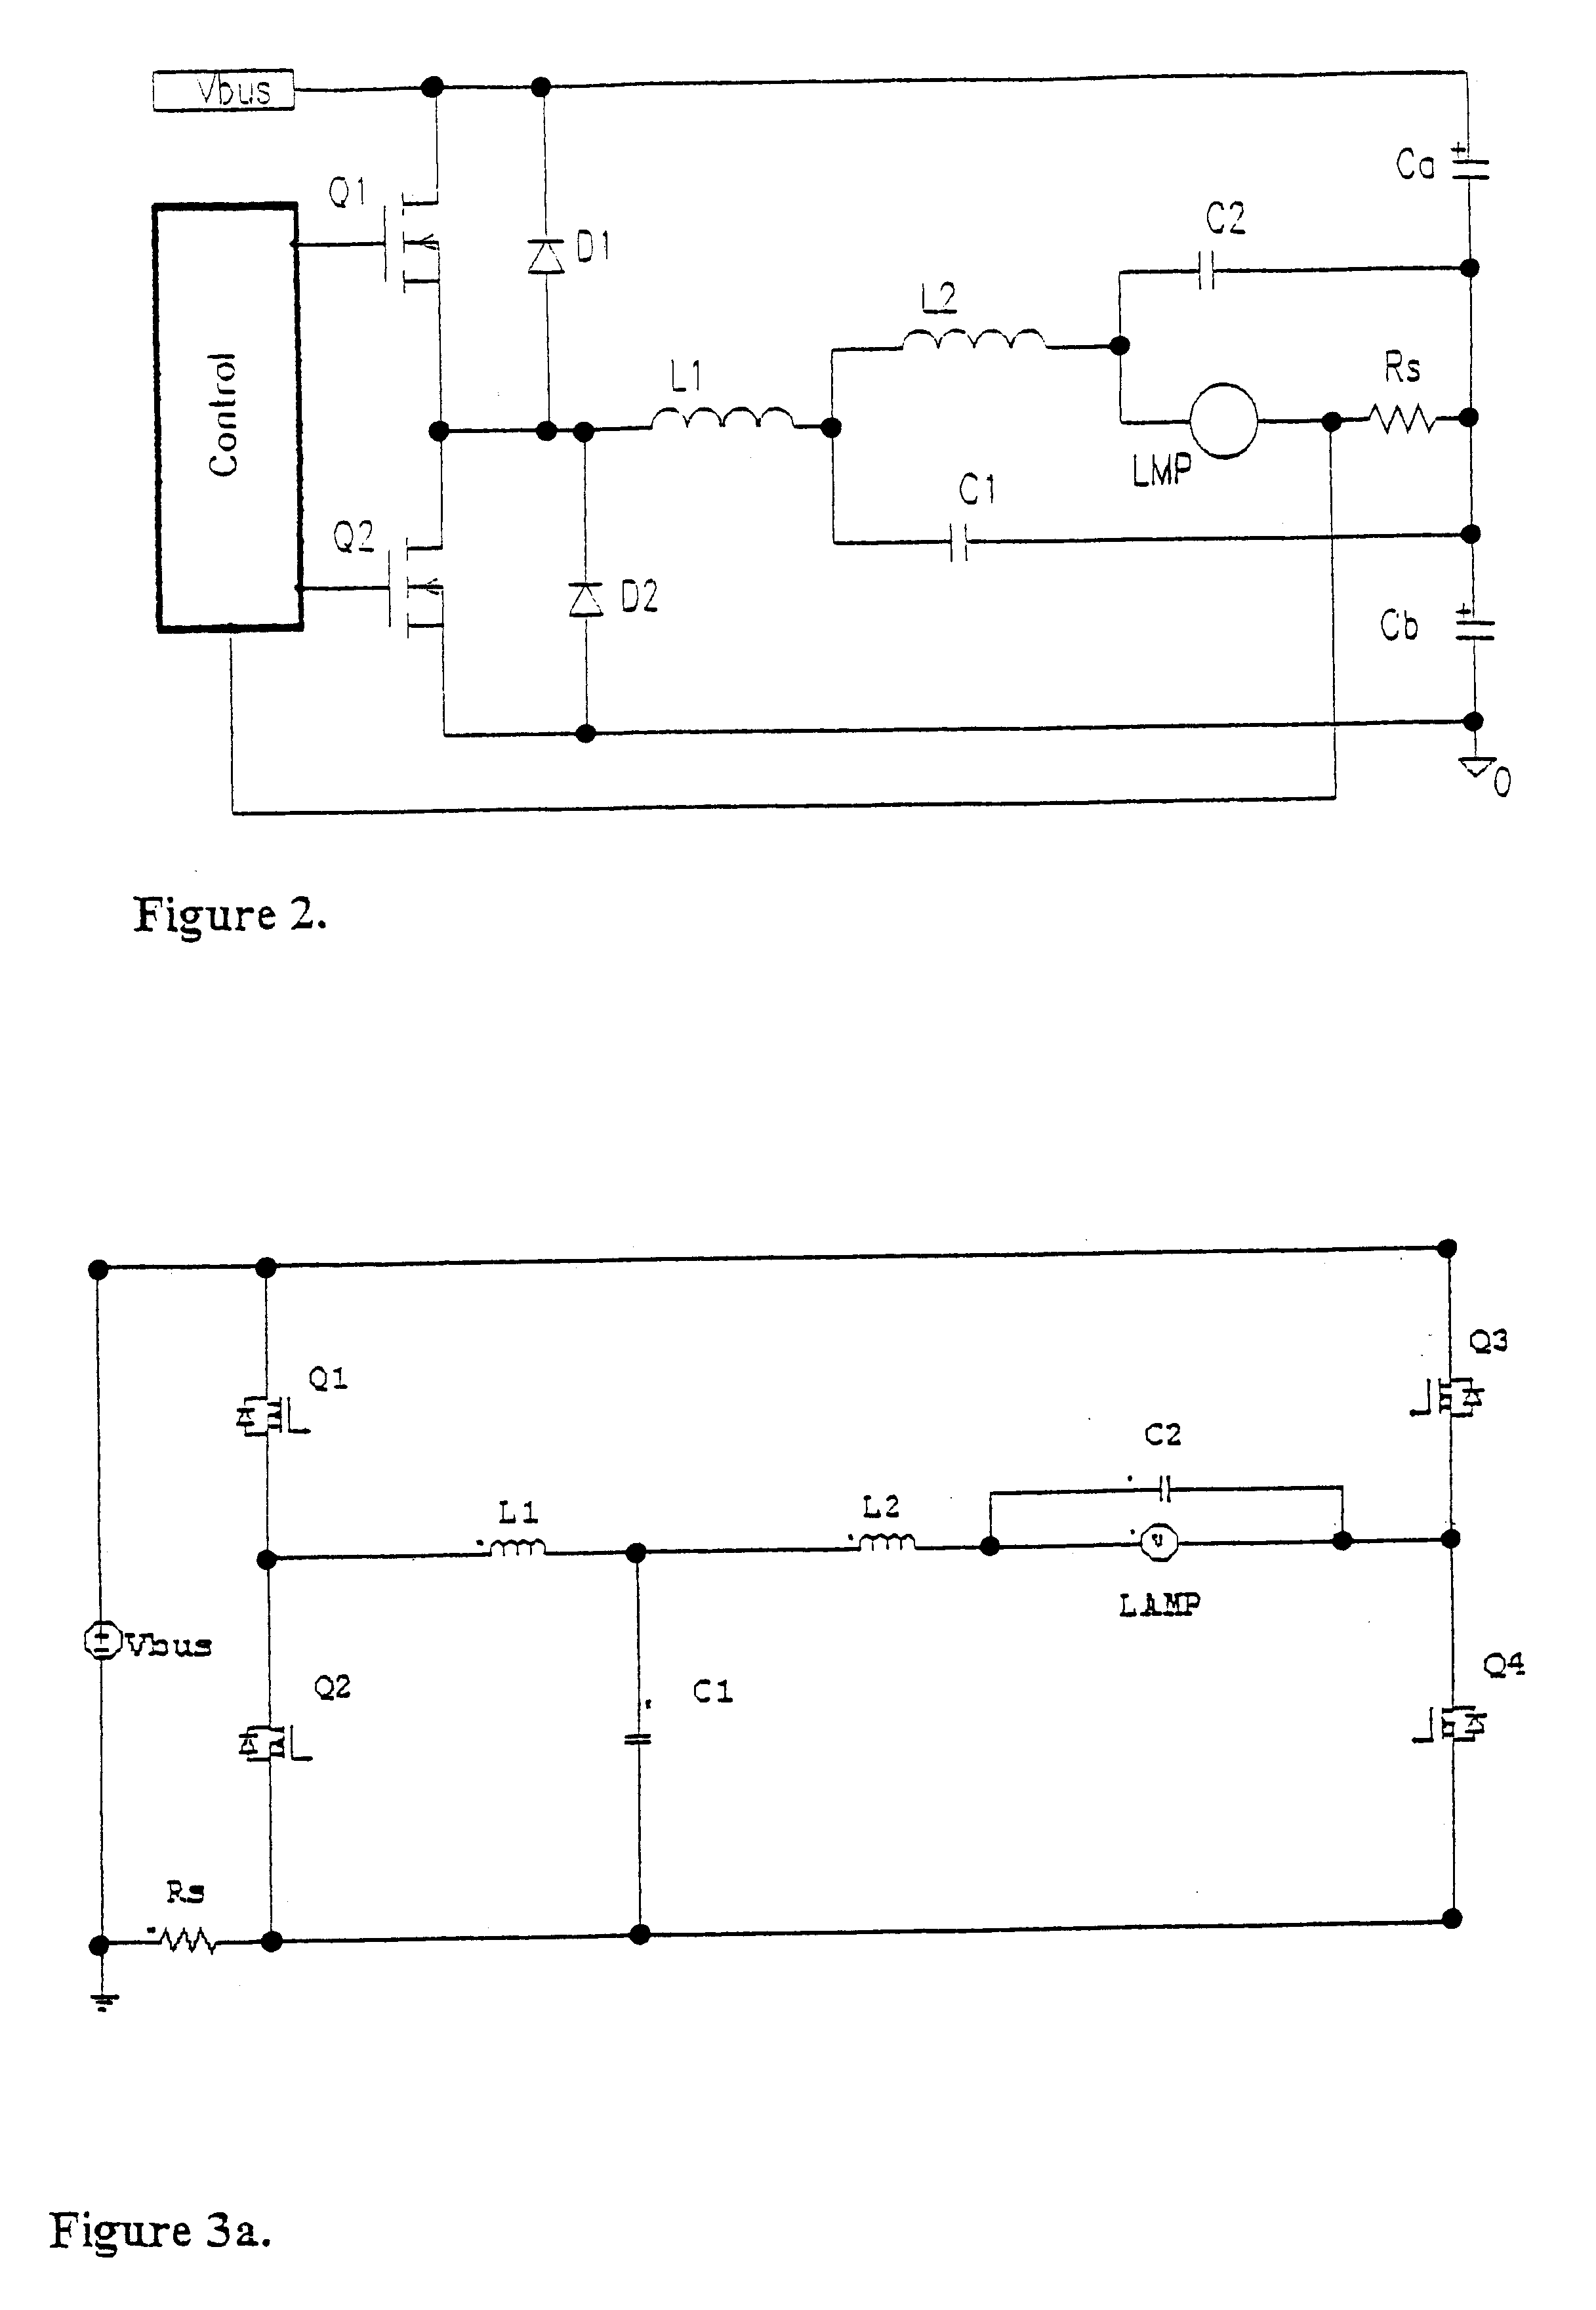 Variable structure circuit topology for HID lamp electronic ballasts